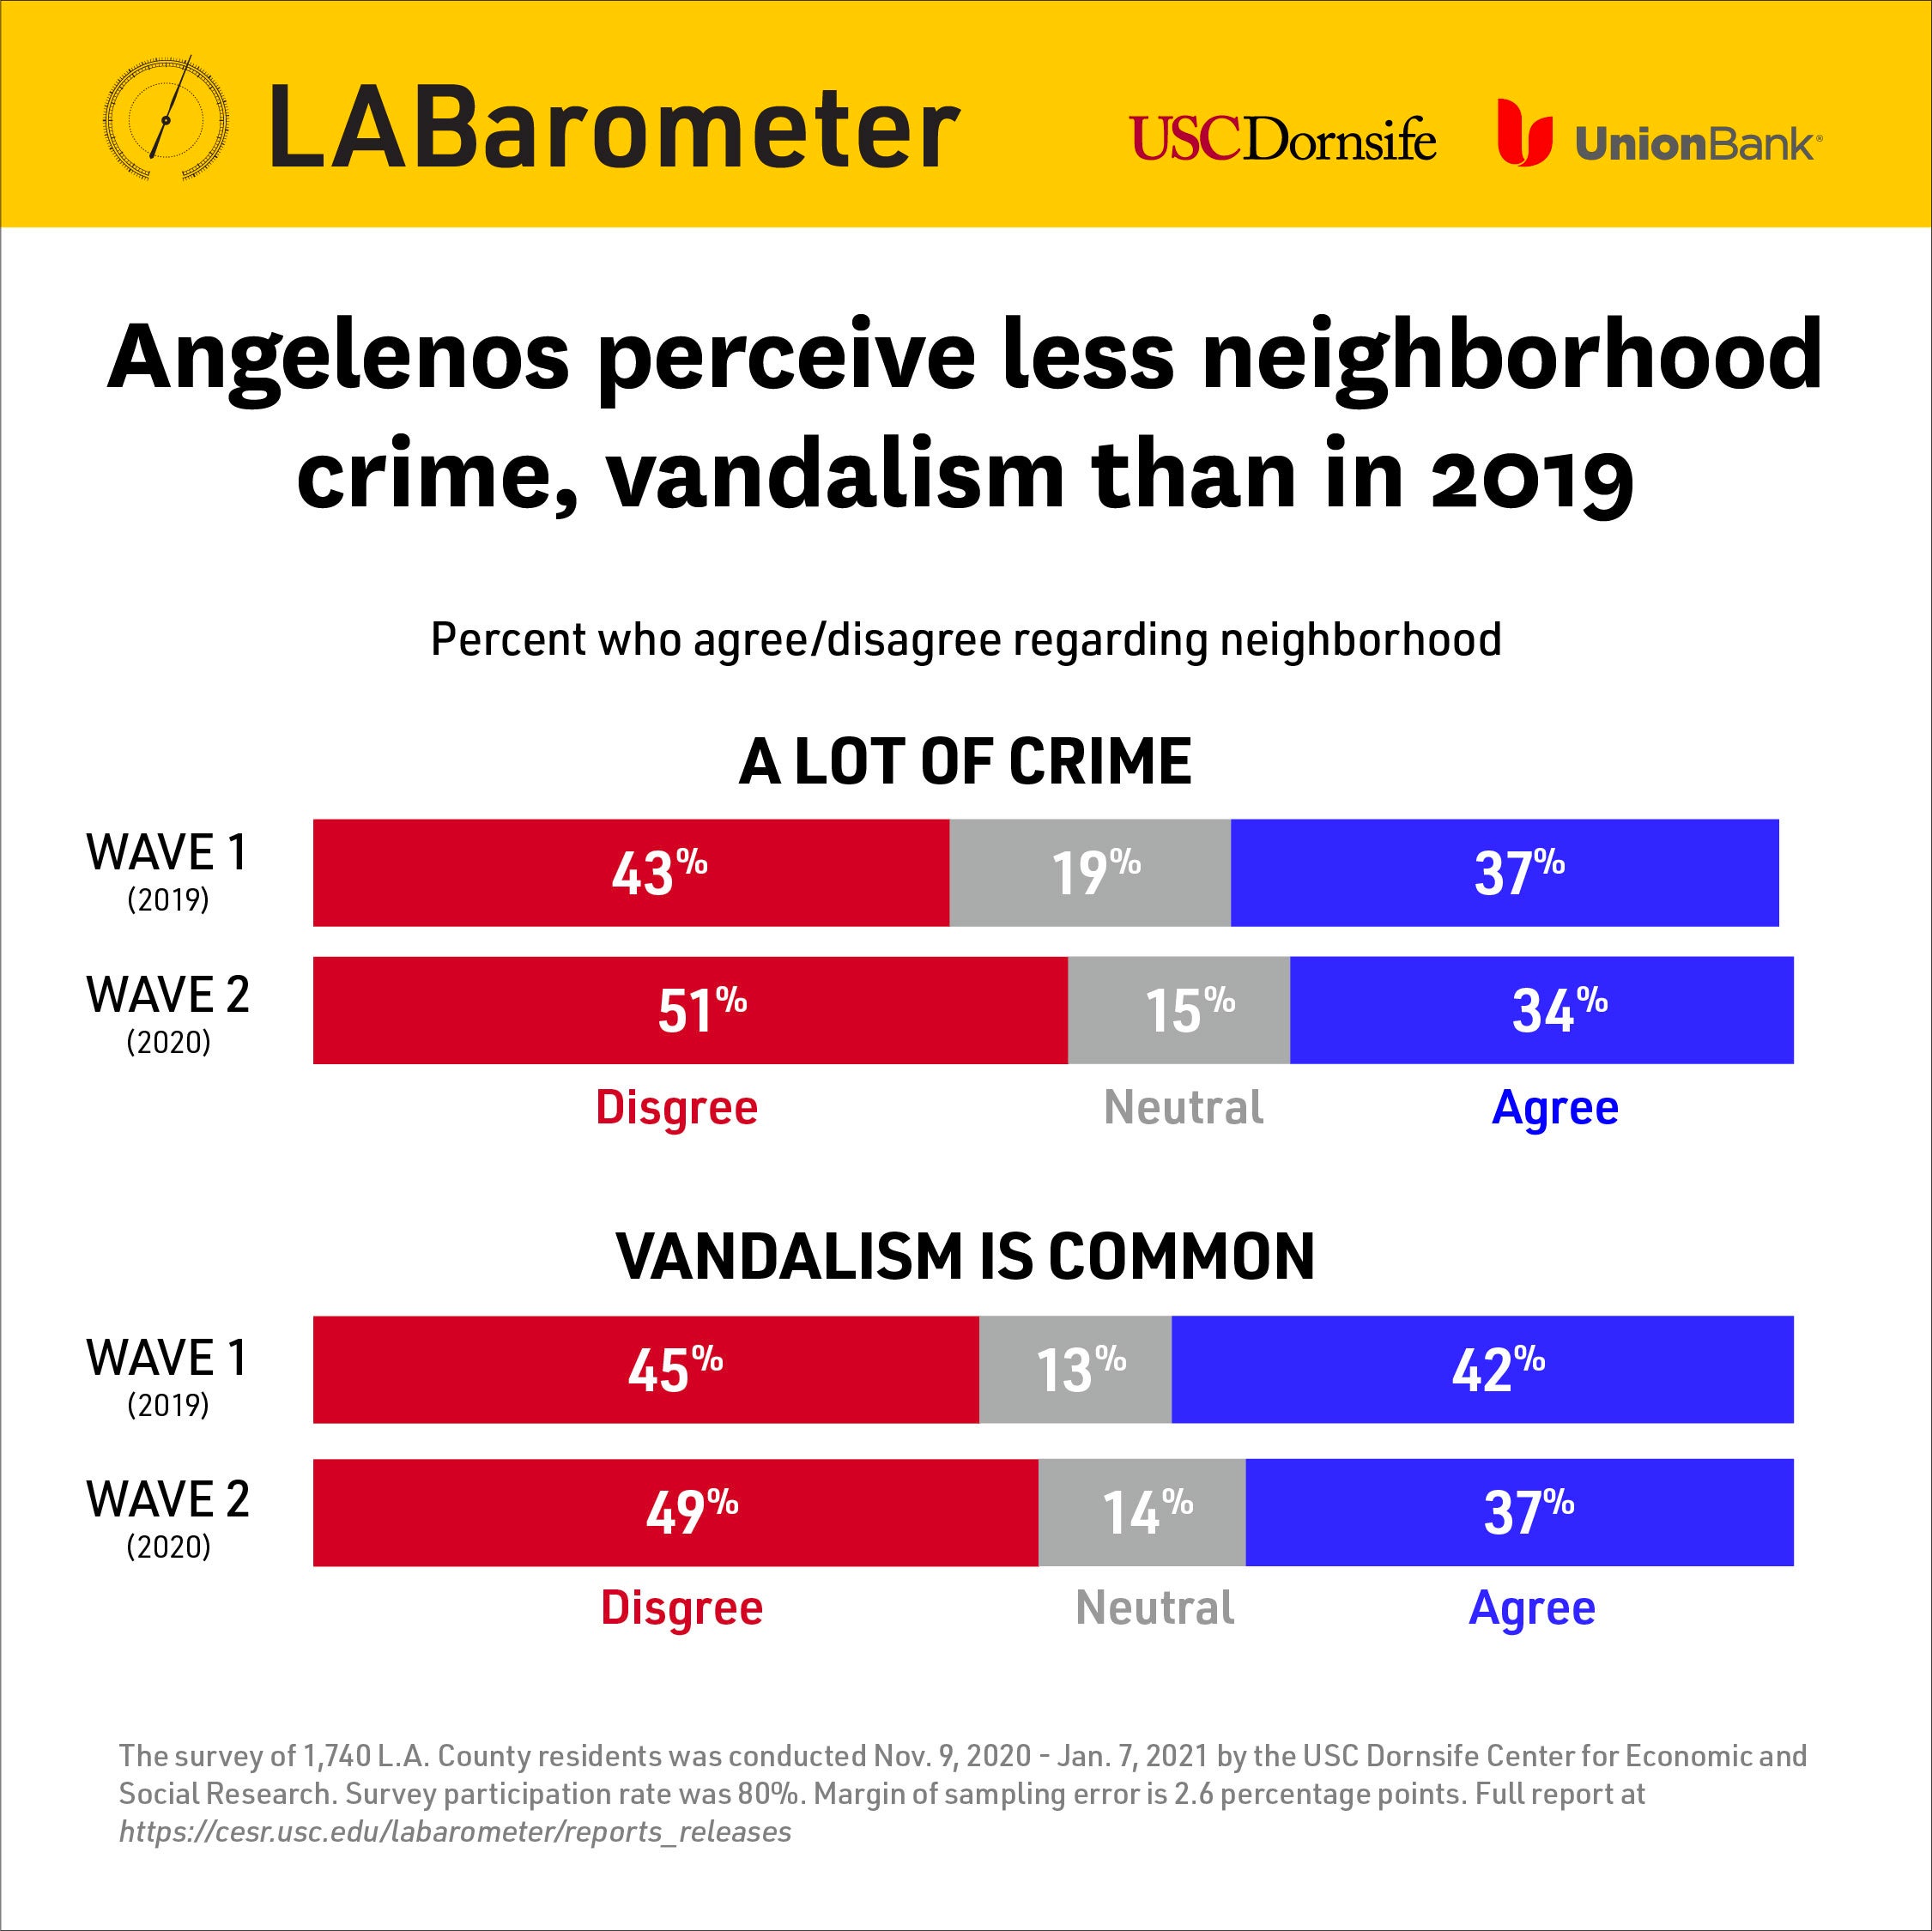 Graphic shows Angelenos perceive less crime and vandalism this year compared to last